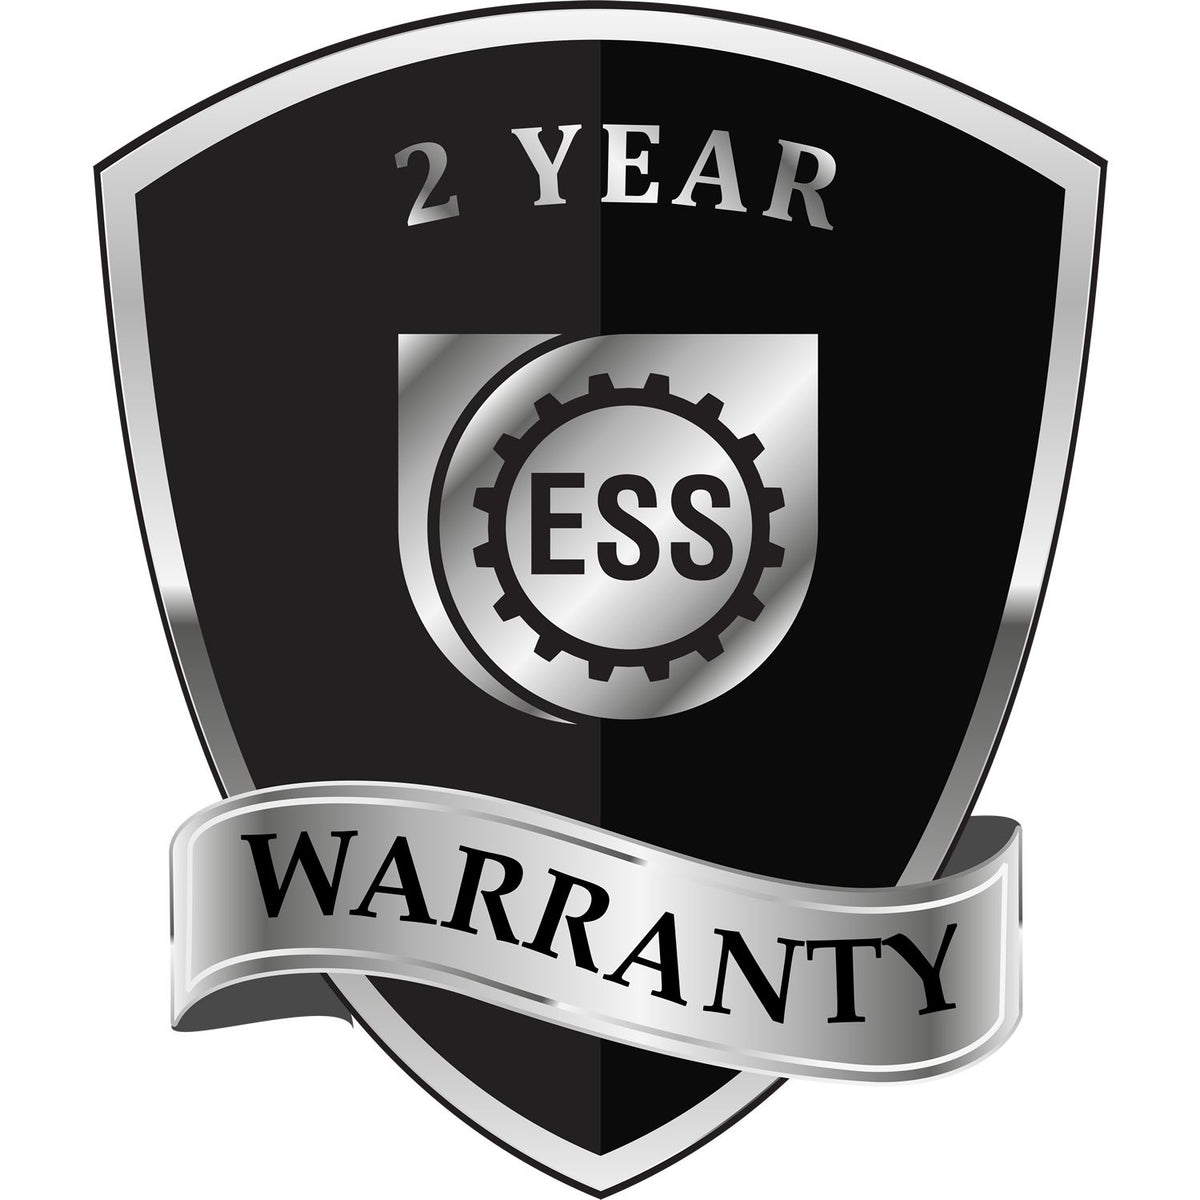 A badge or emblem showing a warranty icon for the Delaware Engineer Desk Seal